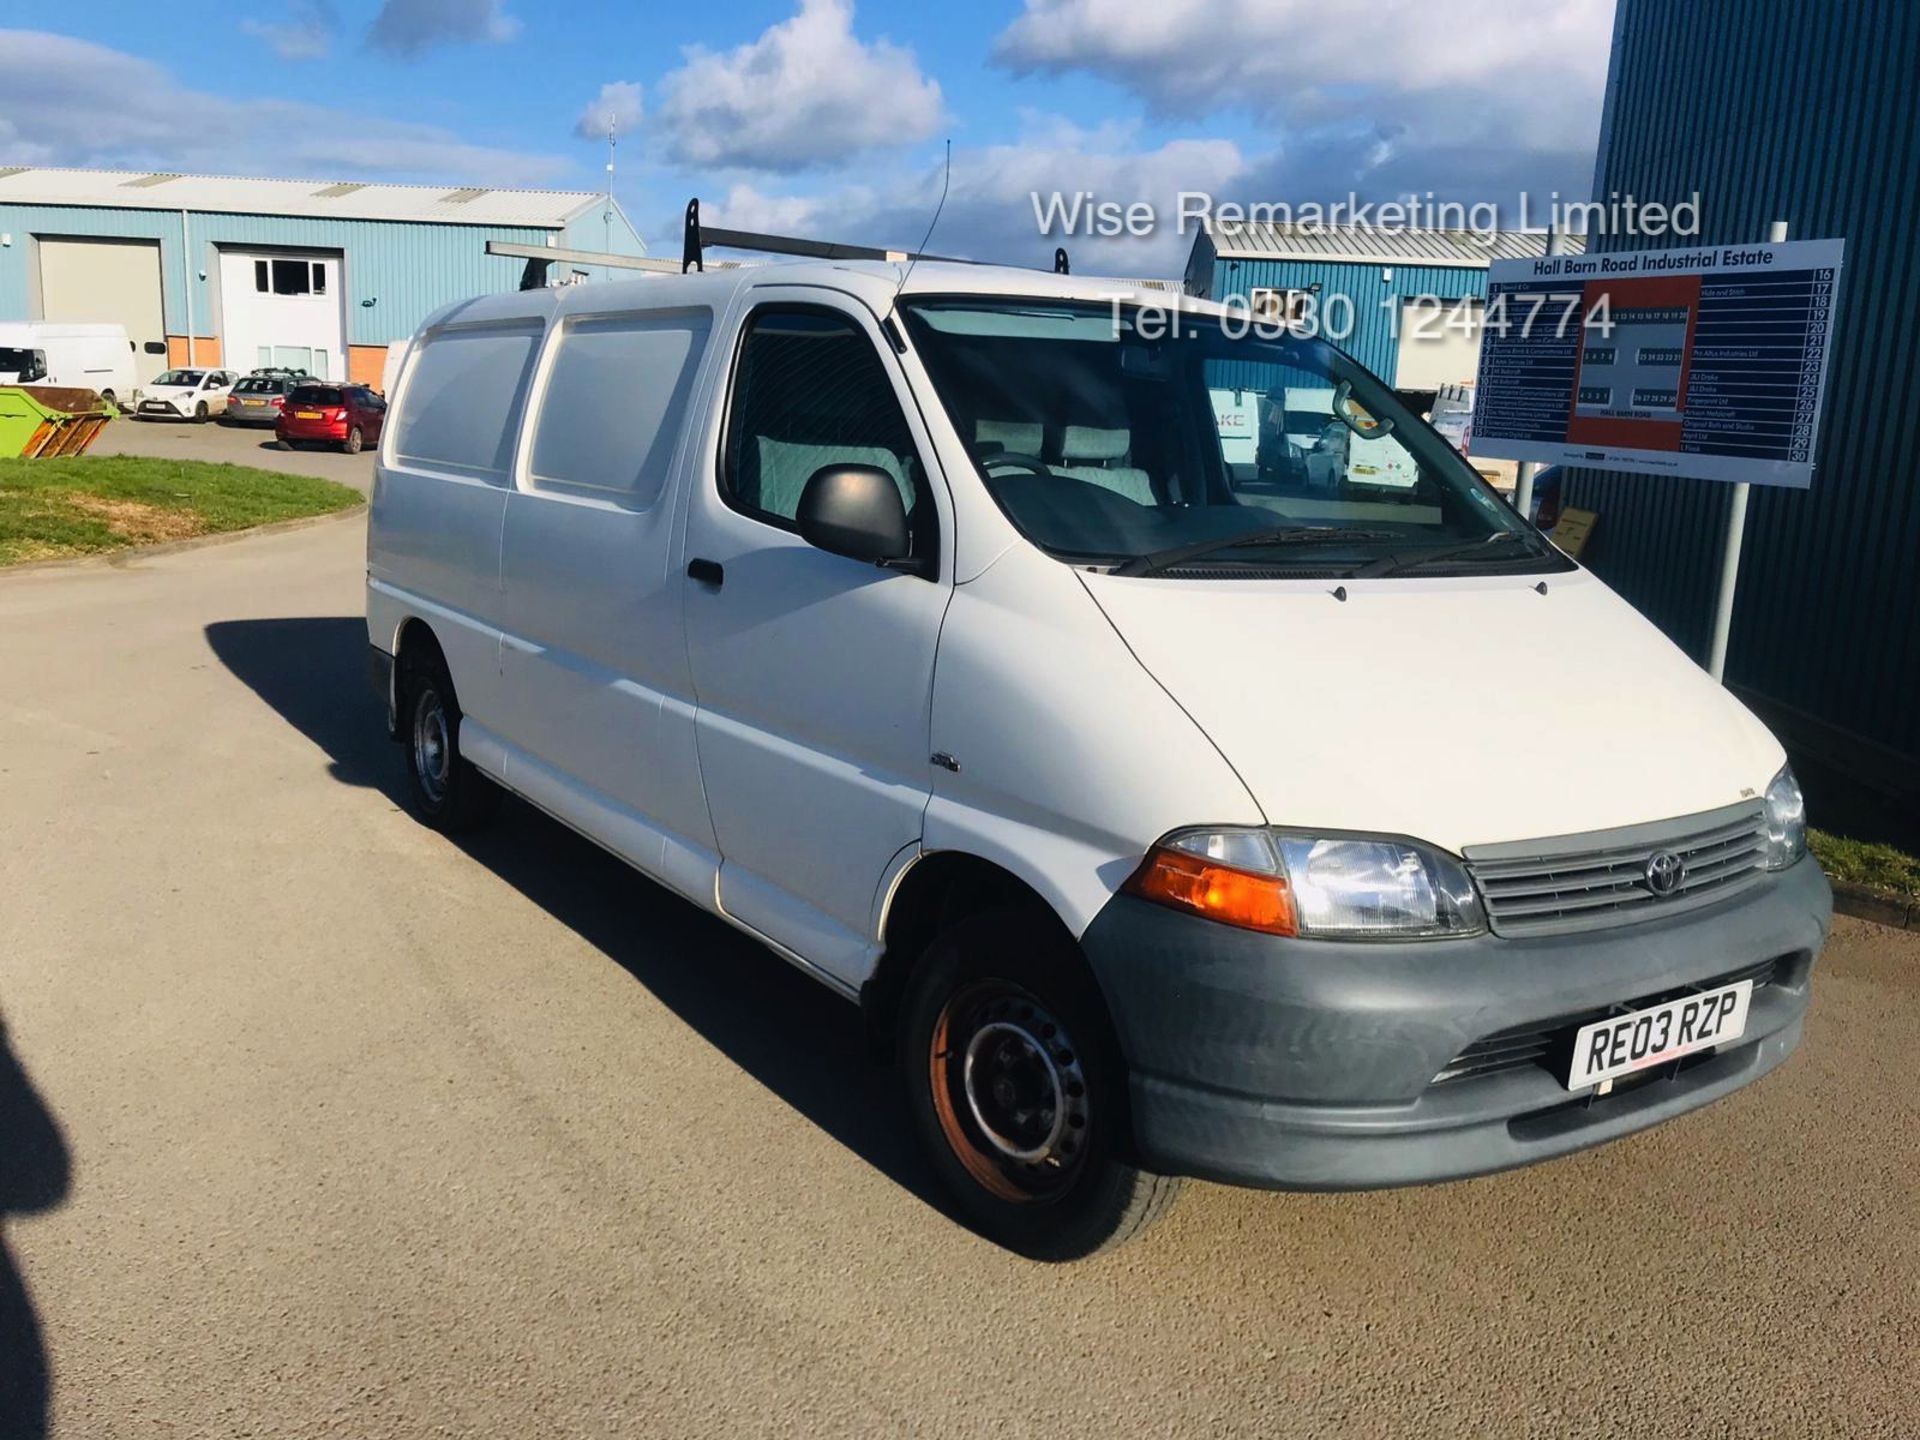 (RESERVE MET)Toyota Hiace 300 GS 2.5 D4D - 2003 03 Reg - 1 Keeper From New - 3 Seater - Roof Rack